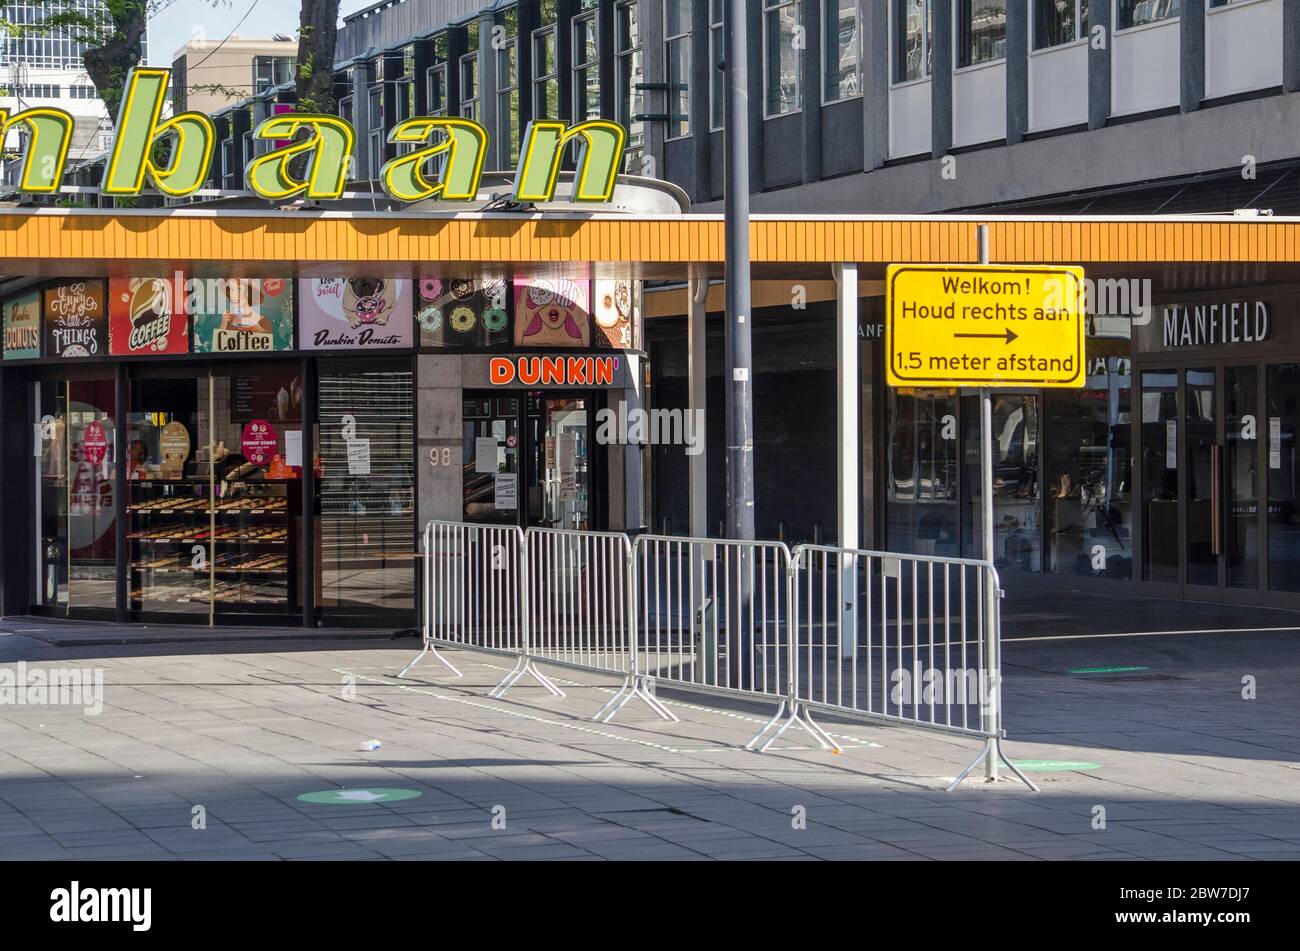 Rotterdam, The Netherlands, May 17, 2020: sign and fences on Lijnbaan shopping street regulating pedestrian flos for the sake of covid-19 prevention Stock Photo